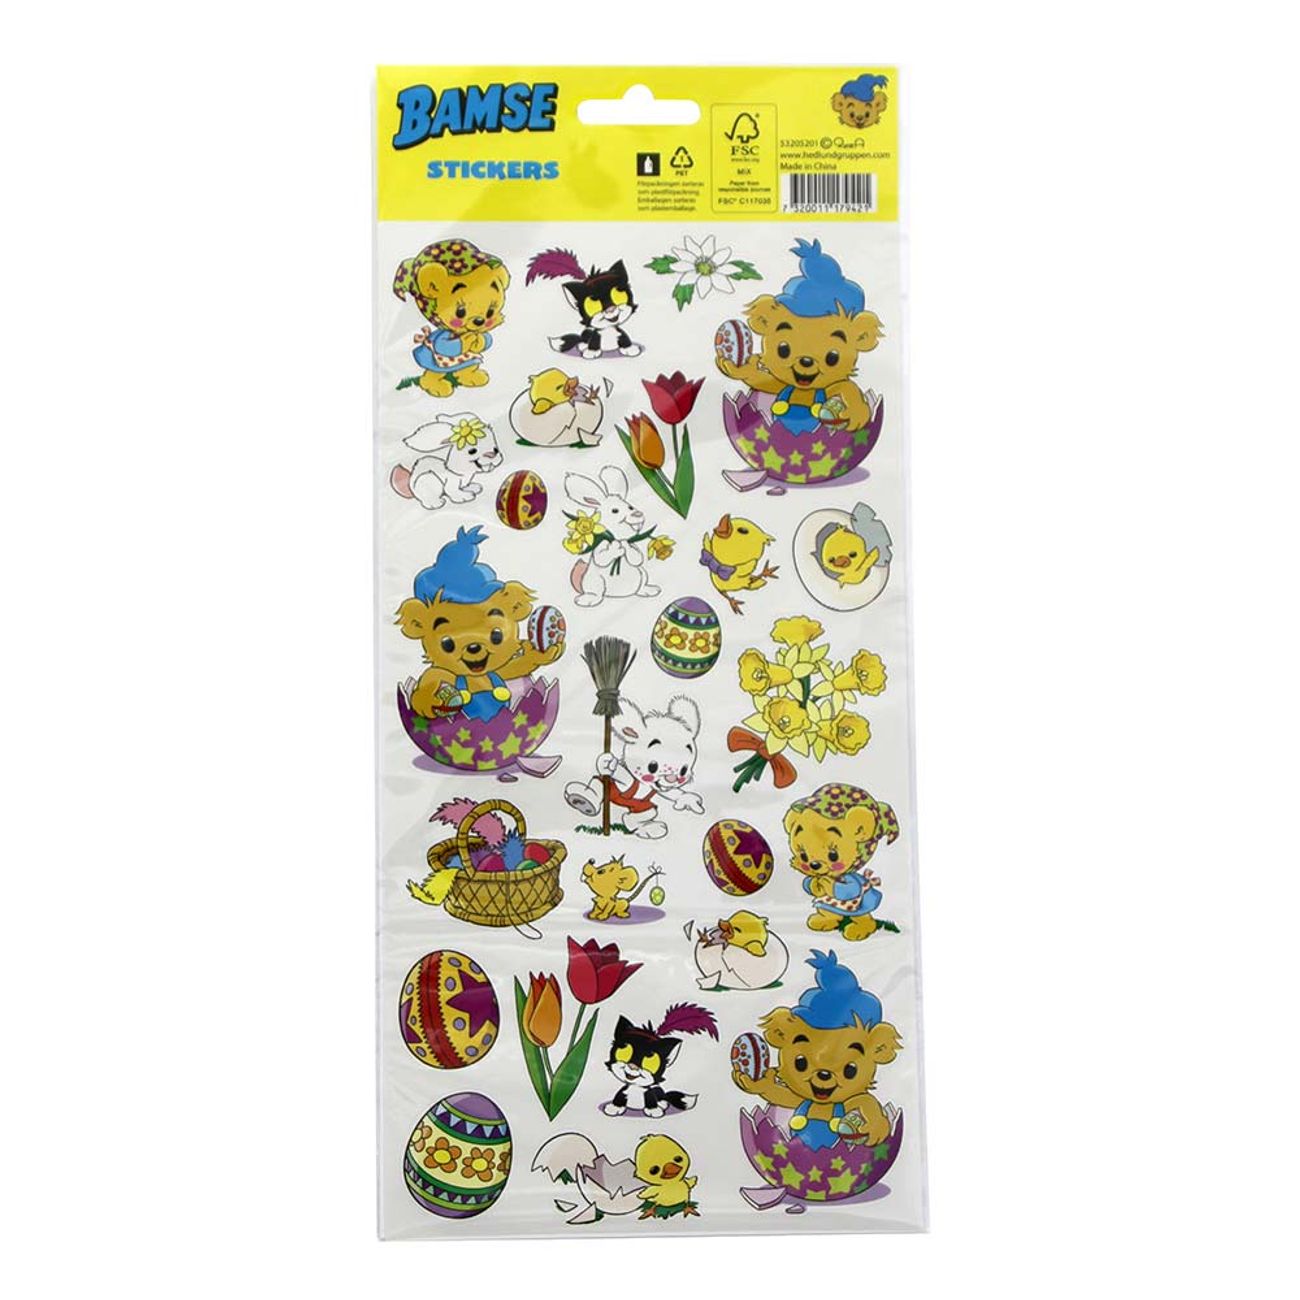 stickers-bamse-pask-93075-1